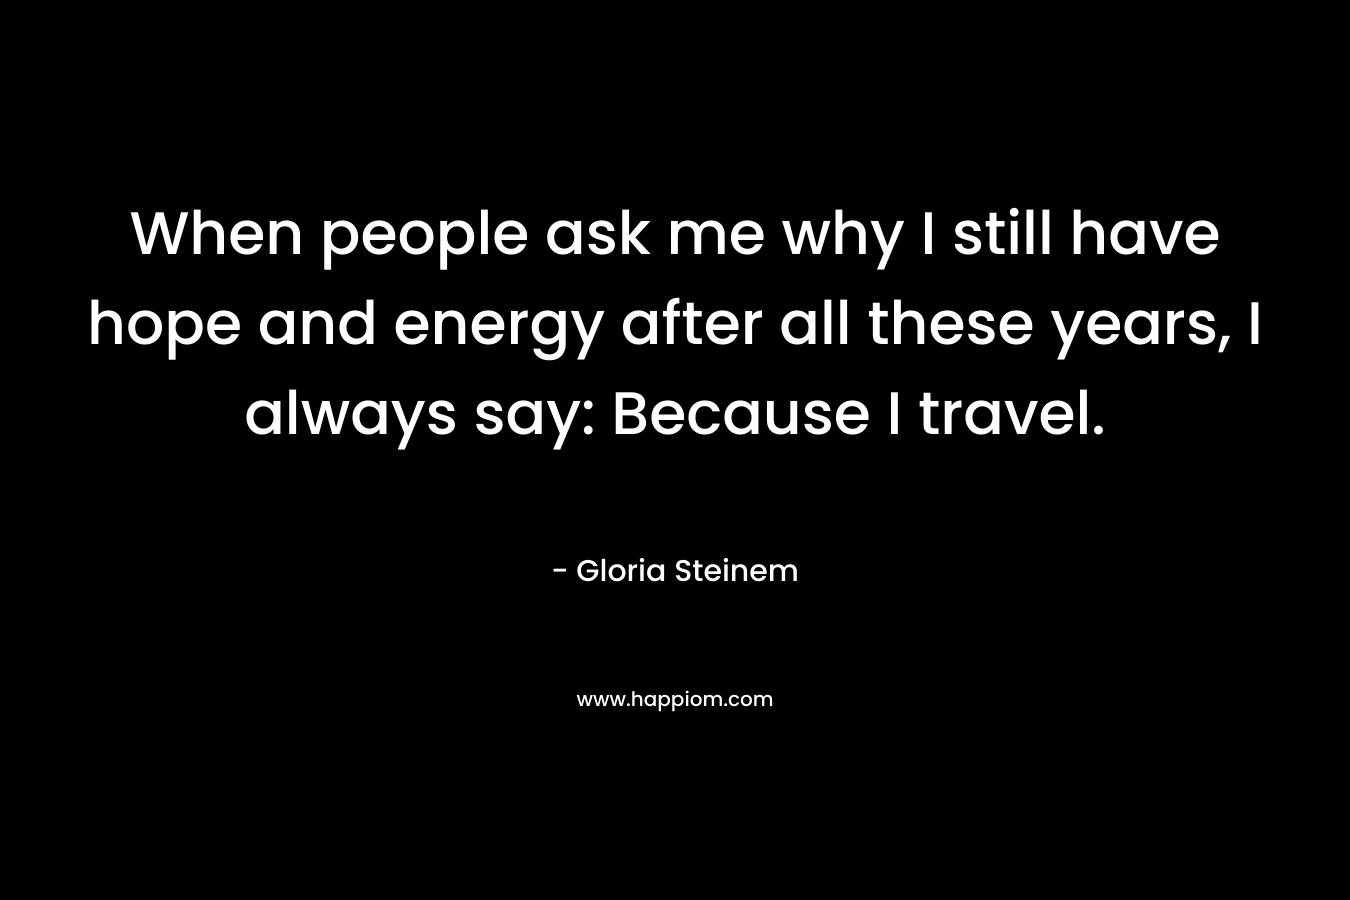 When people ask me why I still have hope and energy after all these years, I always say: Because I travel.